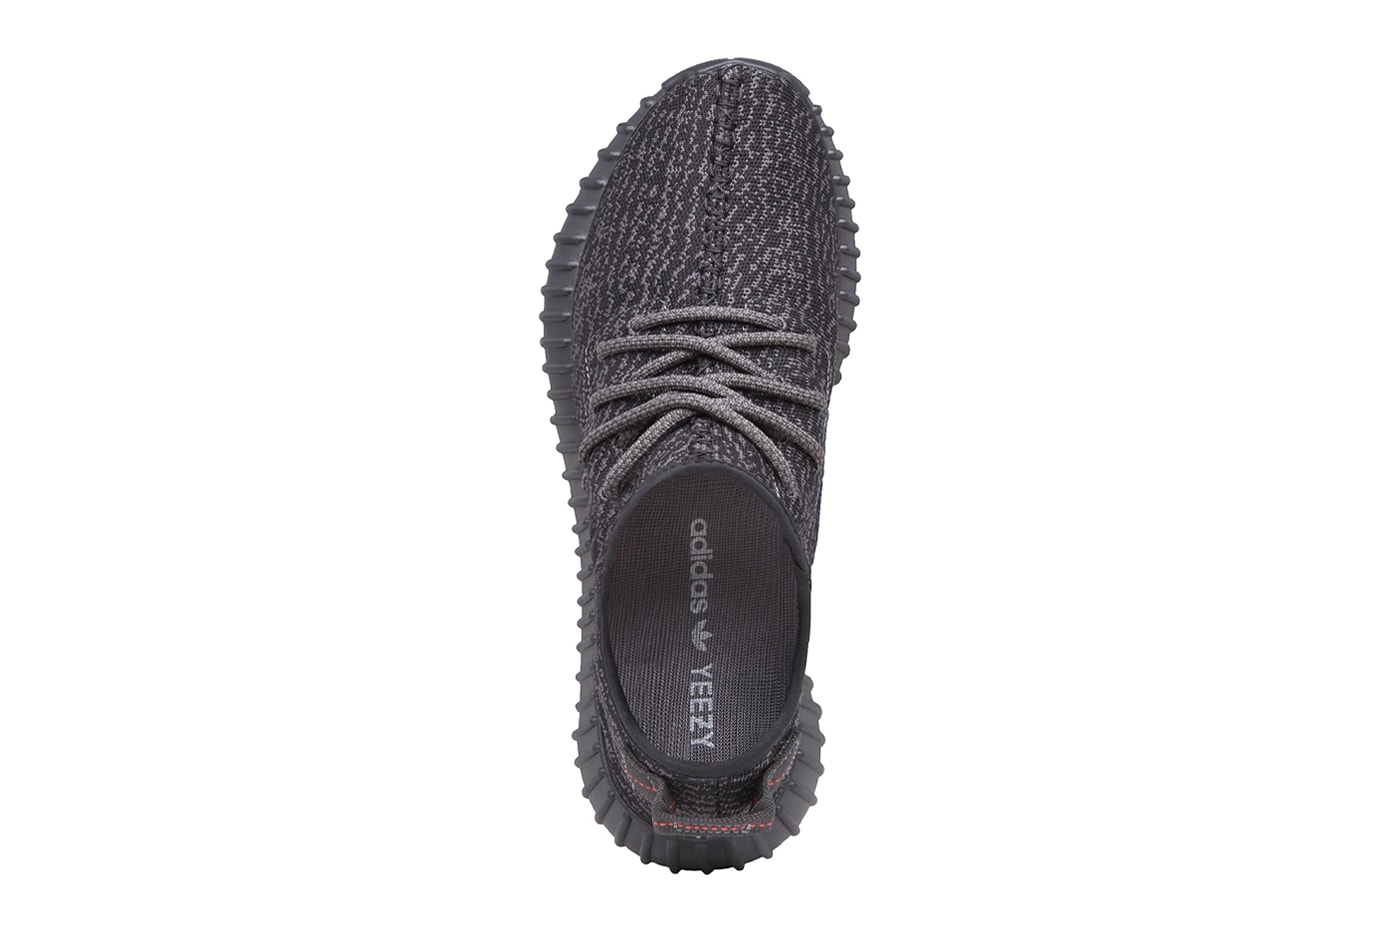 adidas YEEZY BOOST 350 "Pirate Black" a Release Date Hypebeast